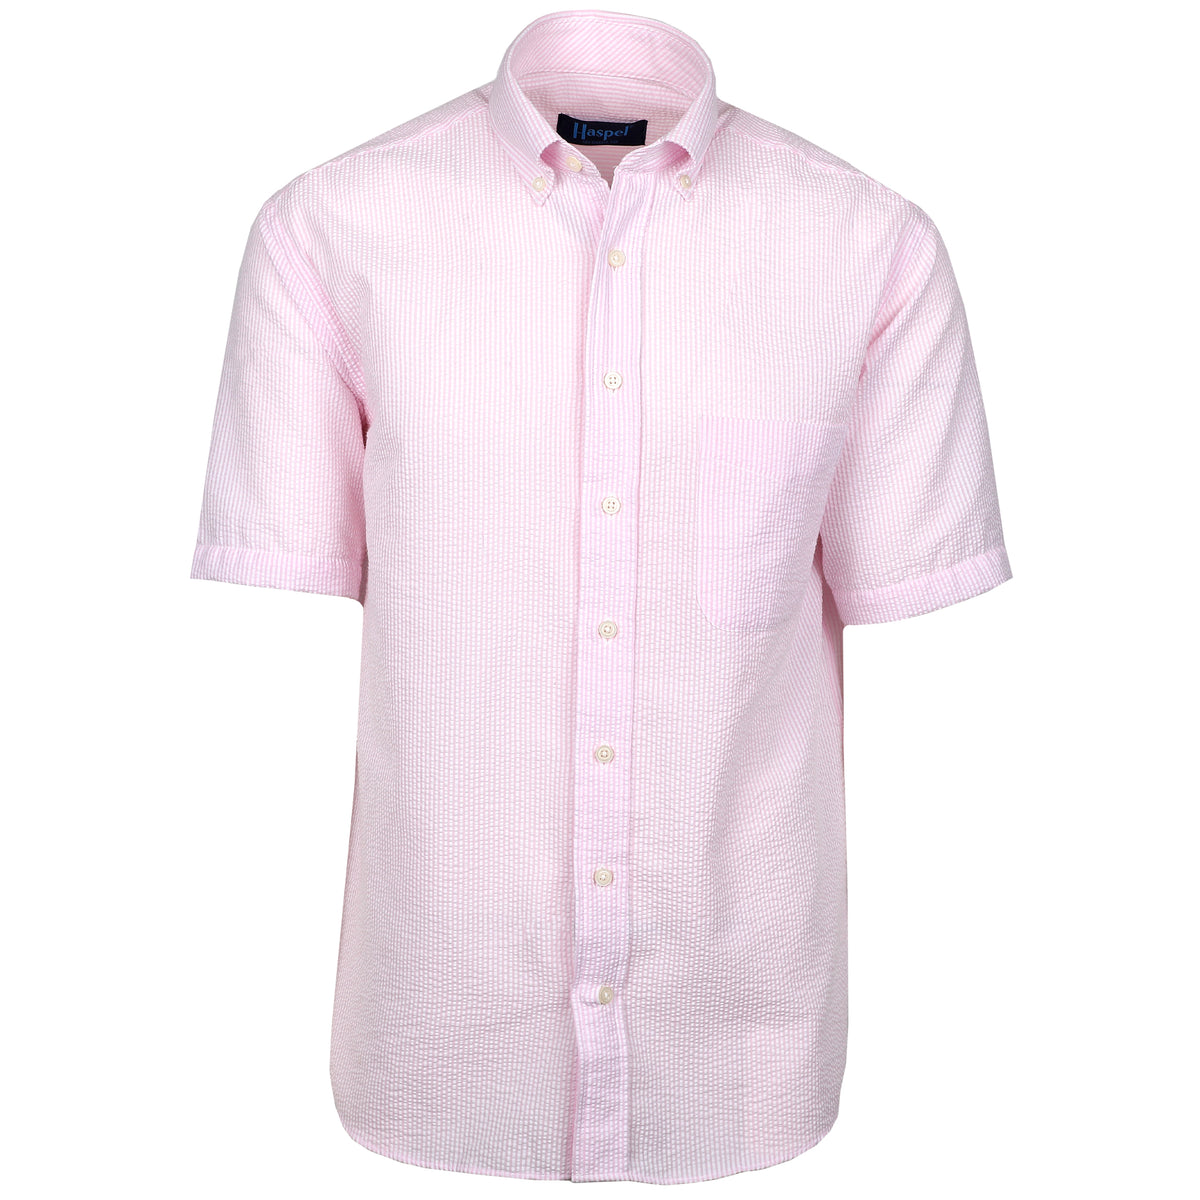 Seersucker all year long in a soft pink seersucker shirt. Subtle, lightweight, and a texture they begs a second look.  100% Cotton Seersucker • Button Down Collar • Short Sleeve • Chest Pocket • Machine Washable • Imported